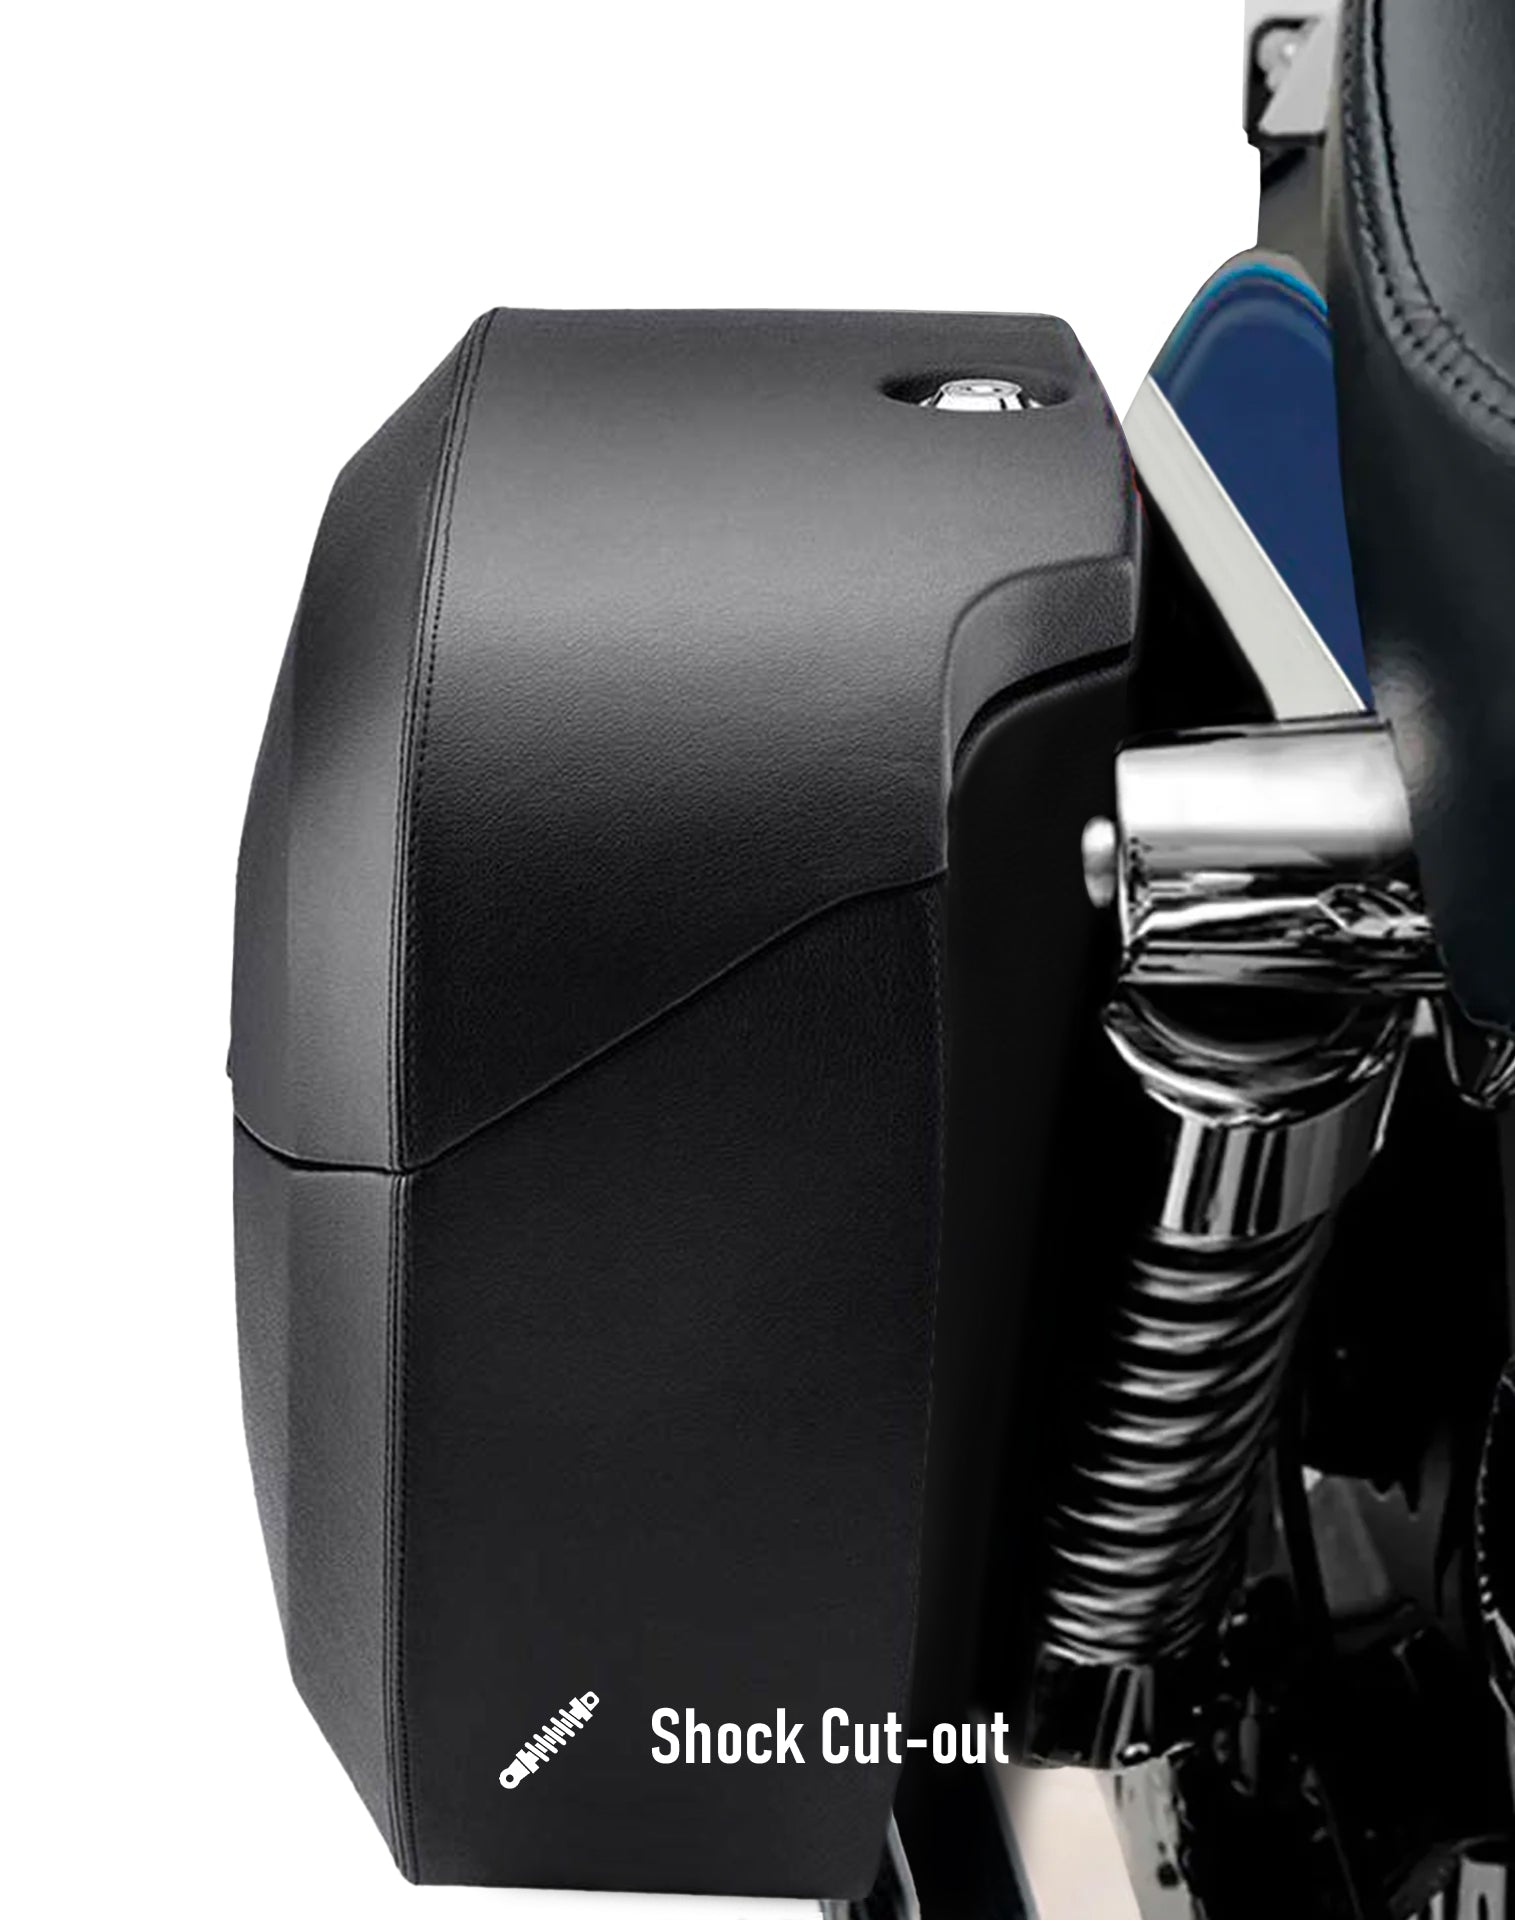 38L - Lamellar Vale Extra Large Shock Cut-out Leather Covered Motorcycle Hard Saddlebags for Harley Dyna Fat Bob FXDF/SE Hard Shell Construction